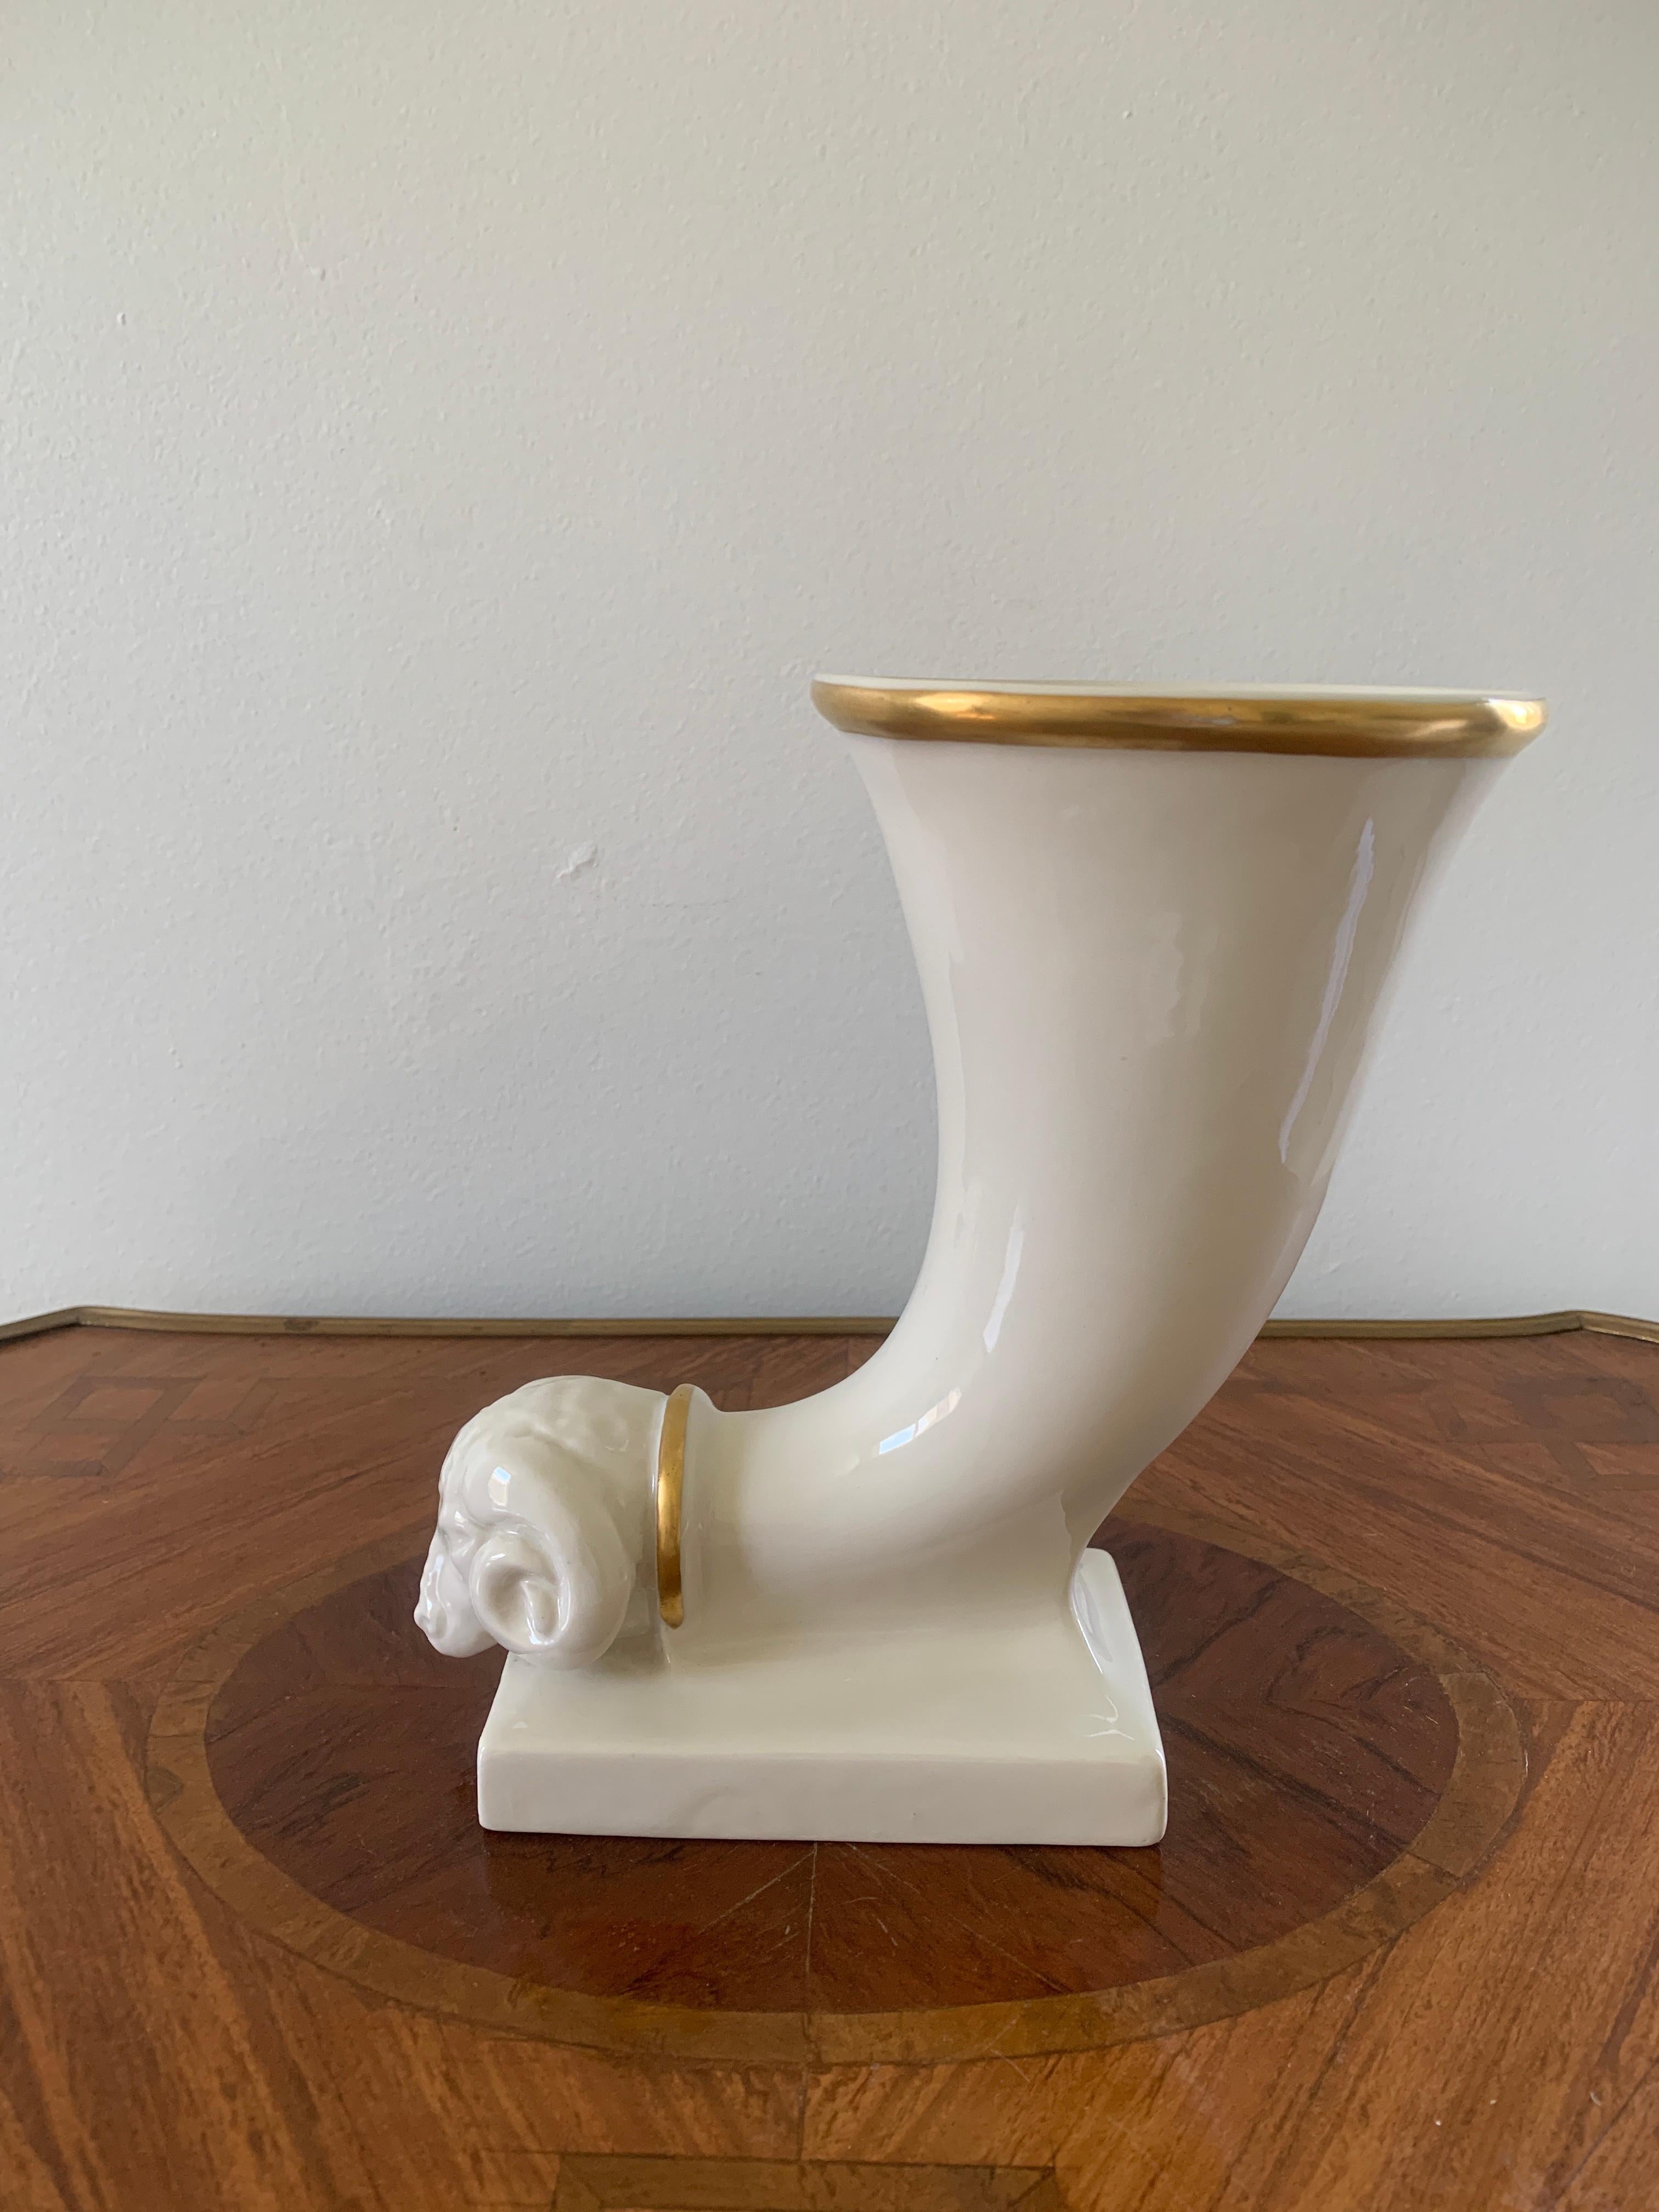 A beautiful neoclassical style cream colored porcelain cornucopia vase with a ram's head and hand-painted gold details.
